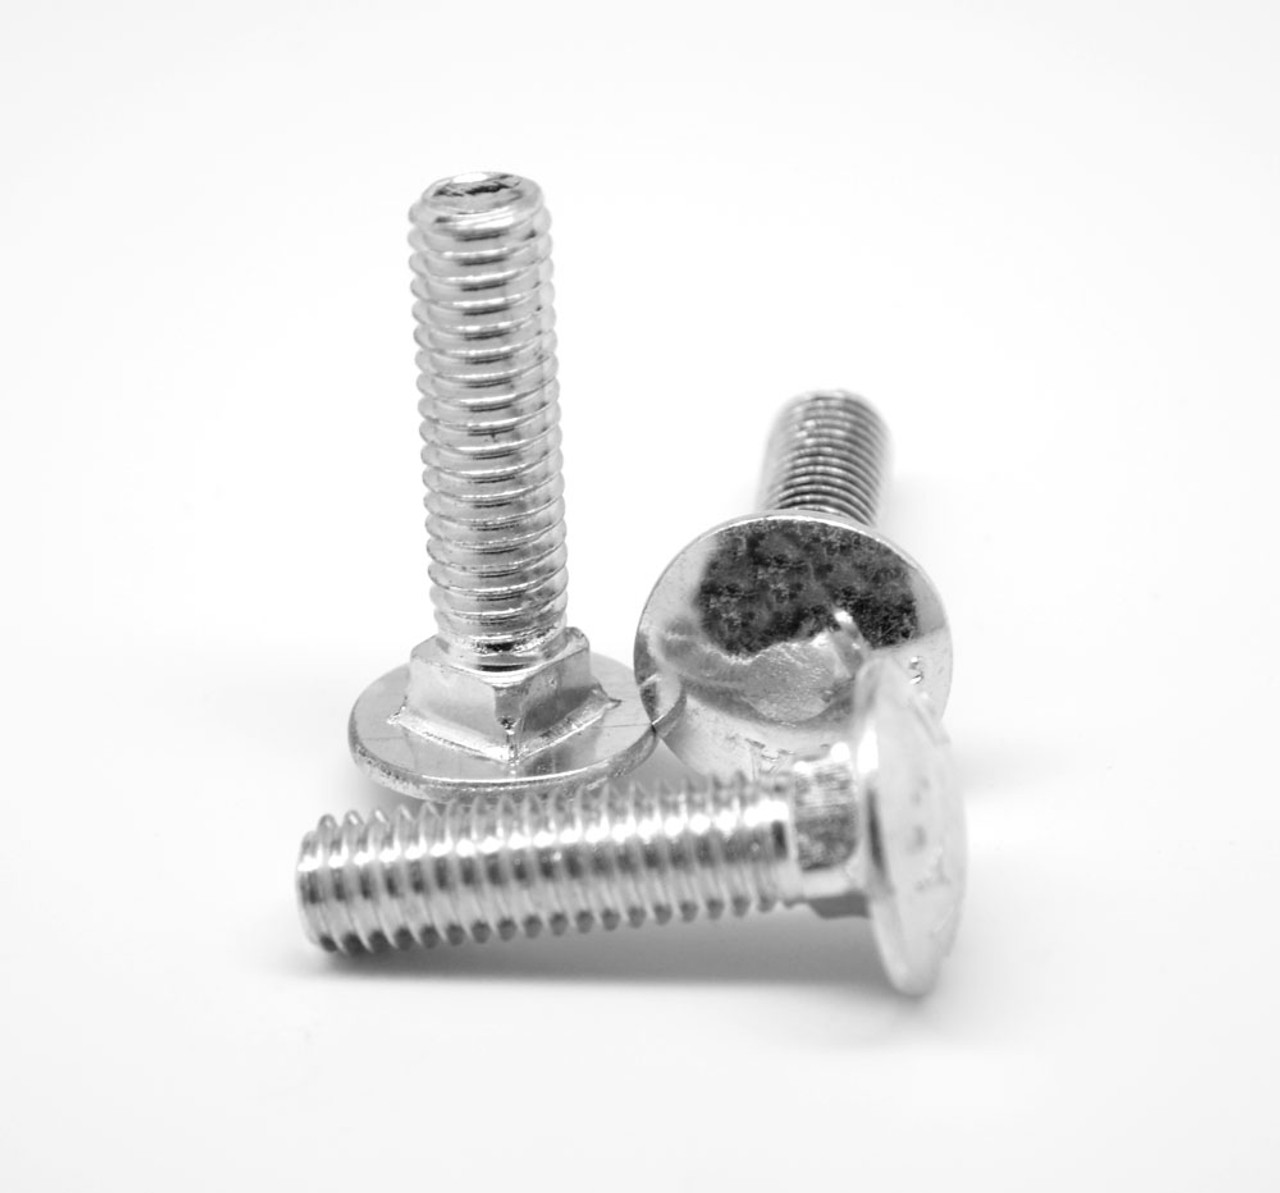 1/4"-20 x 5 1/2" (FT) Coarse Thread A307 Grade A Carriage Bolt Low Carbon Steel Zinc Plated